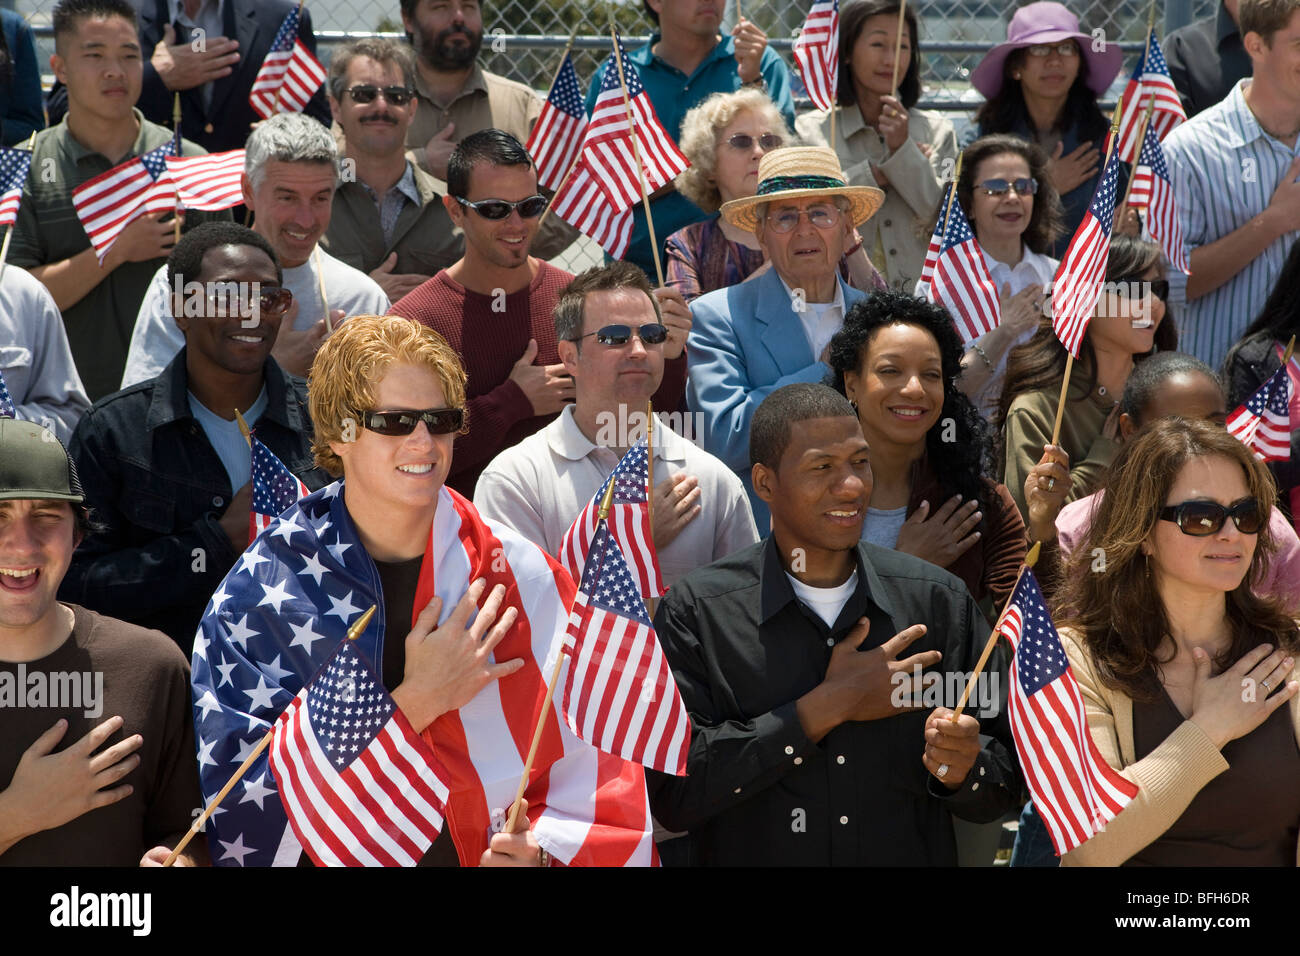 Crowd holding American flags Stock Photo